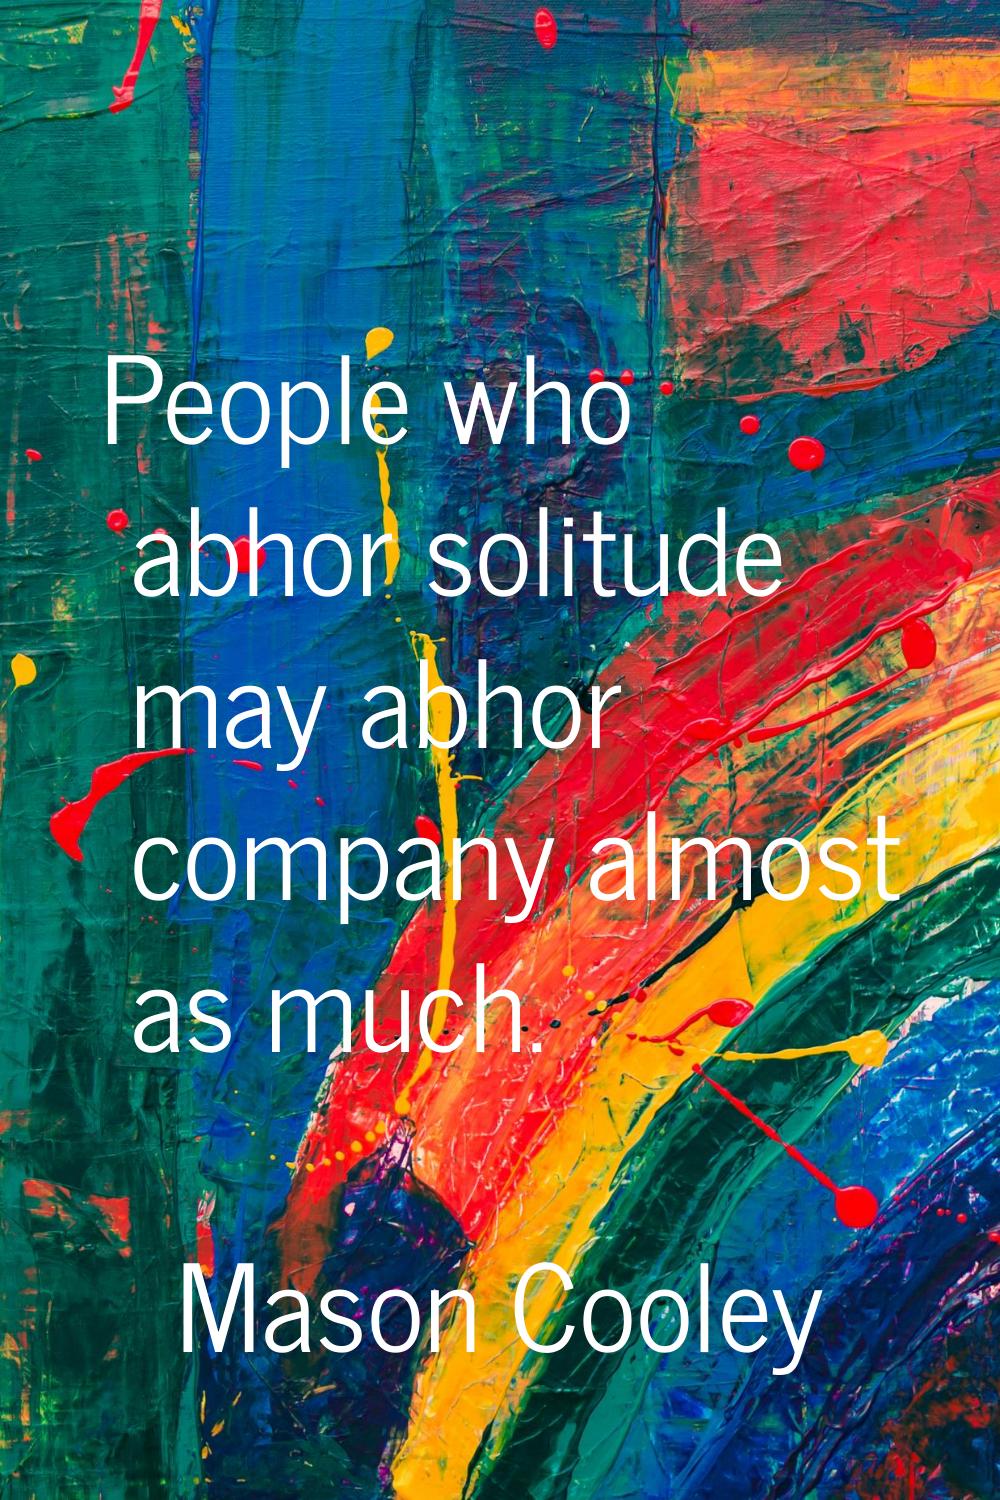 People who abhor solitude may abhor company almost as much.